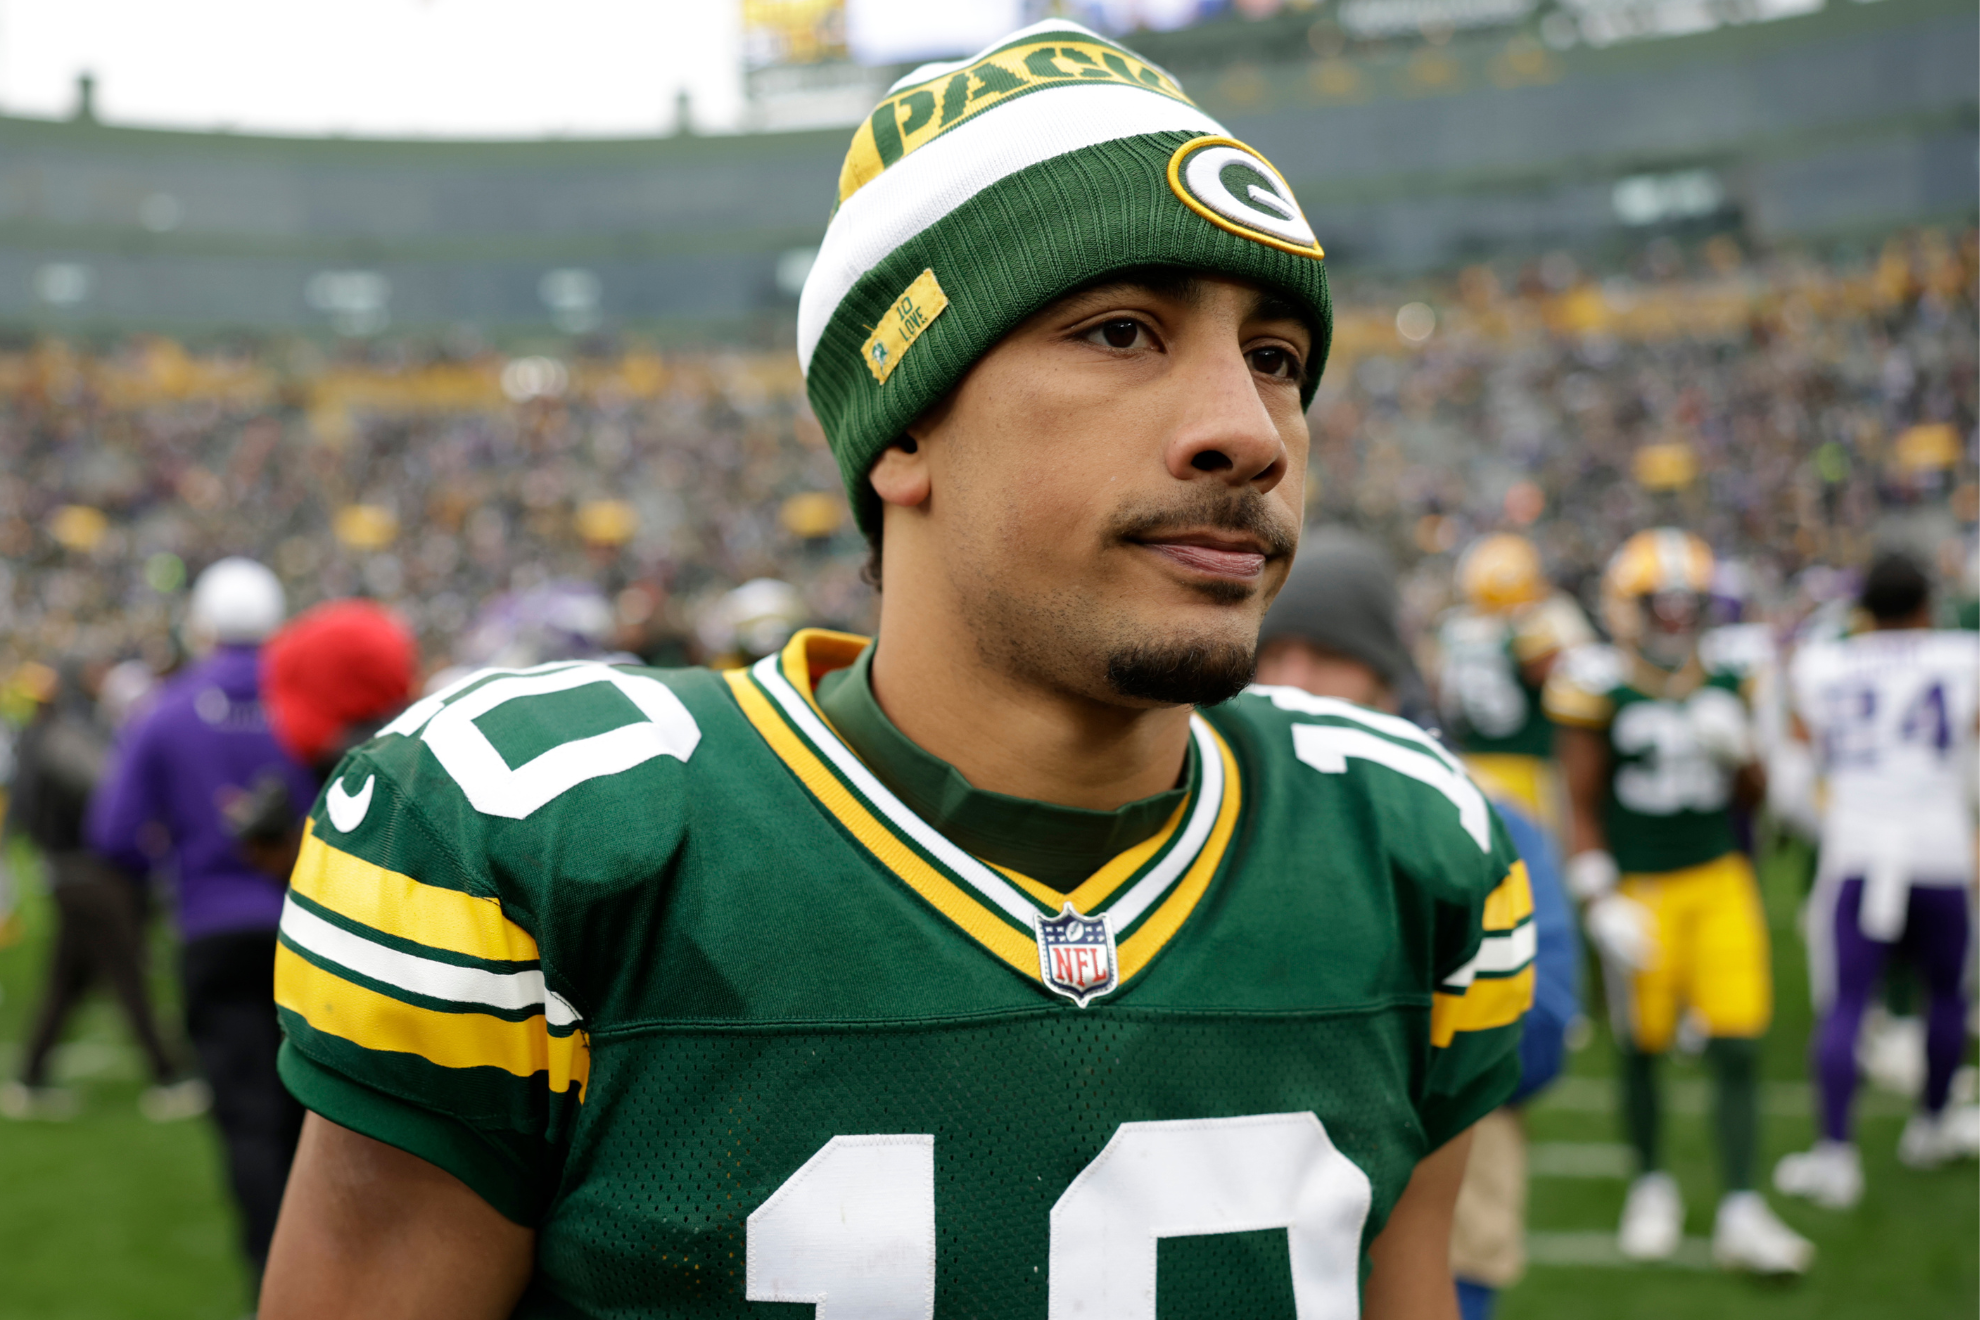 Love has completed only 58 percent of his passes since taking over for Rodgers this season.